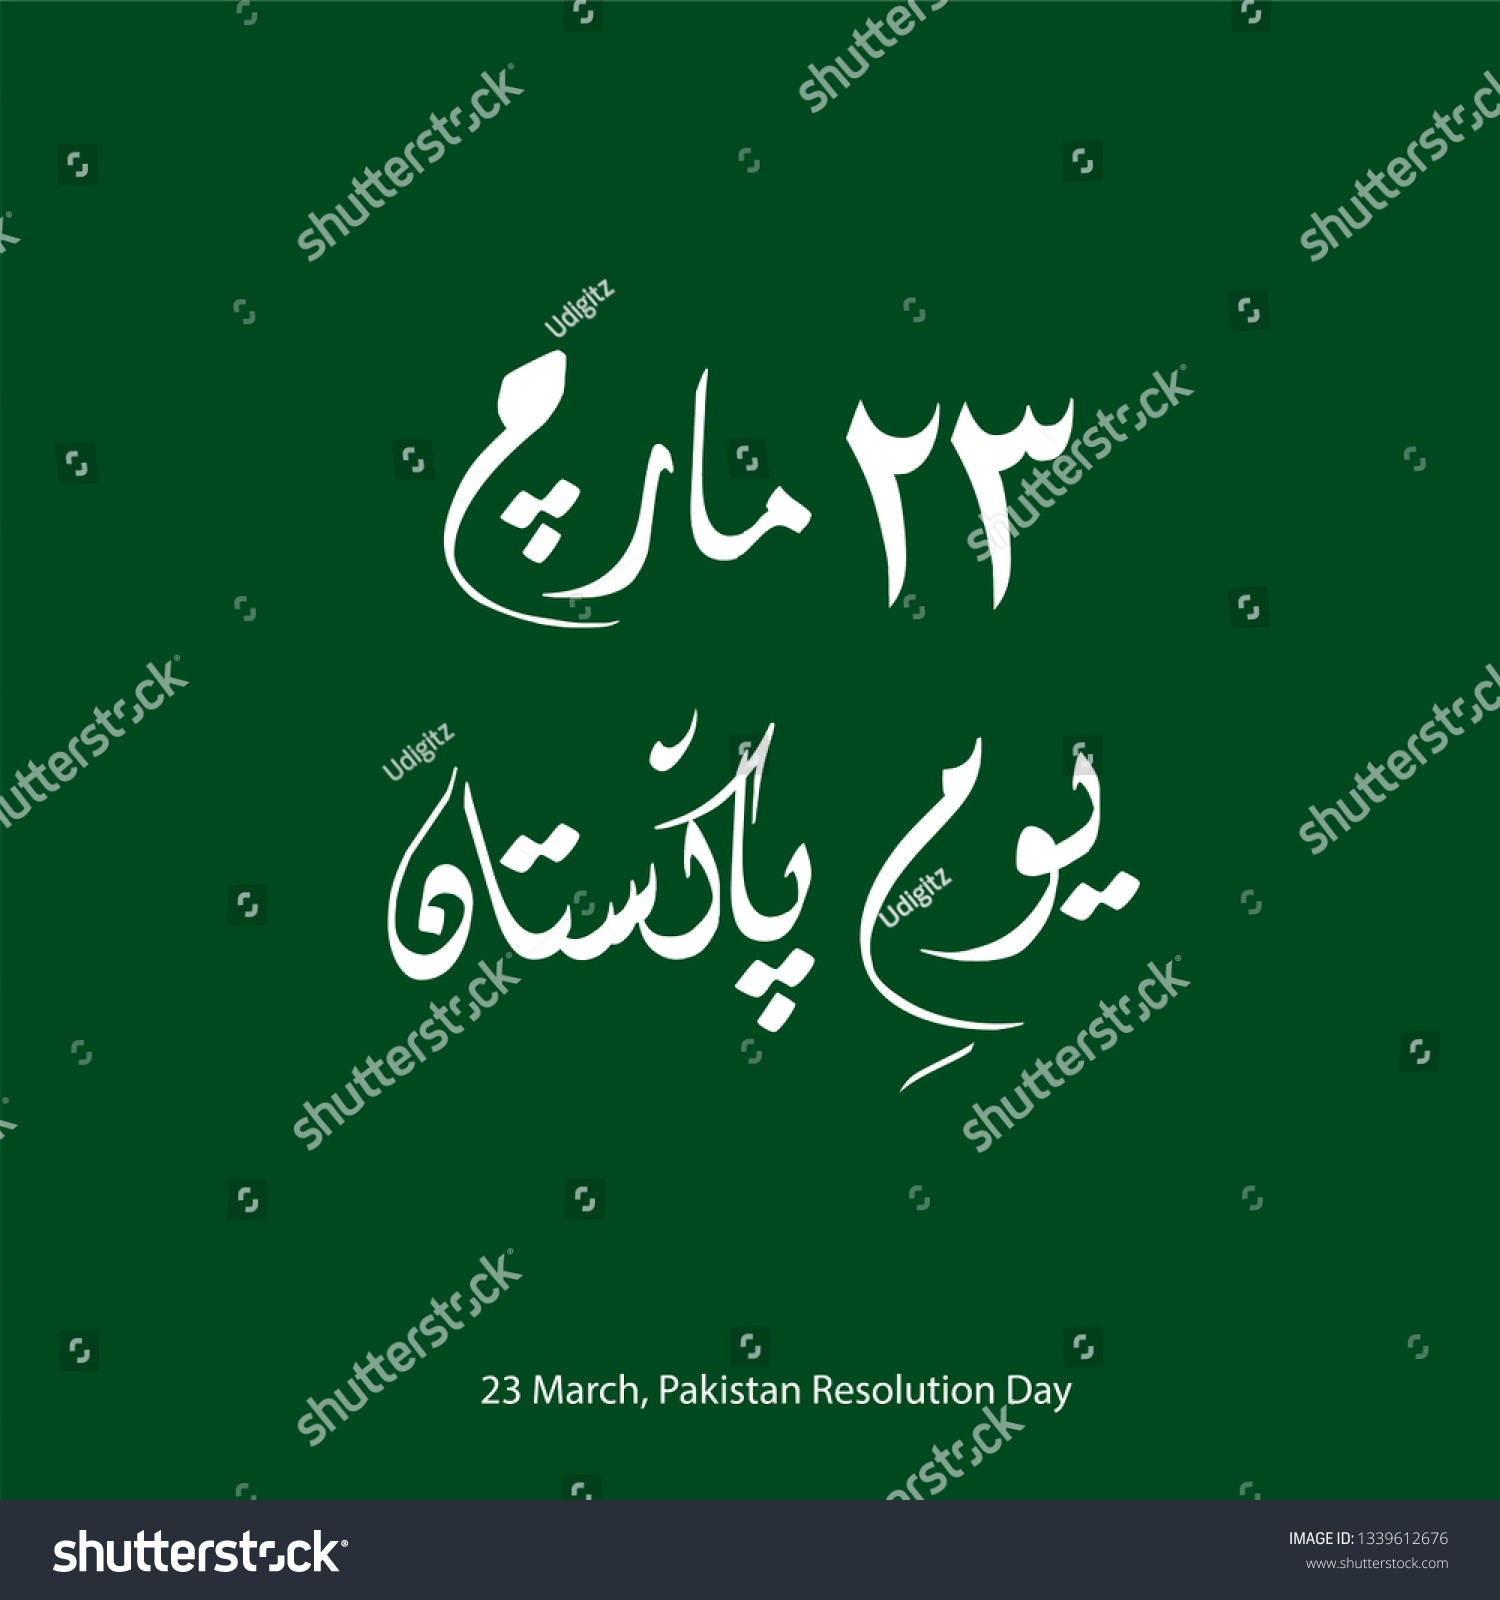 23rd March Pakistan Day Resolution Stock Image Now